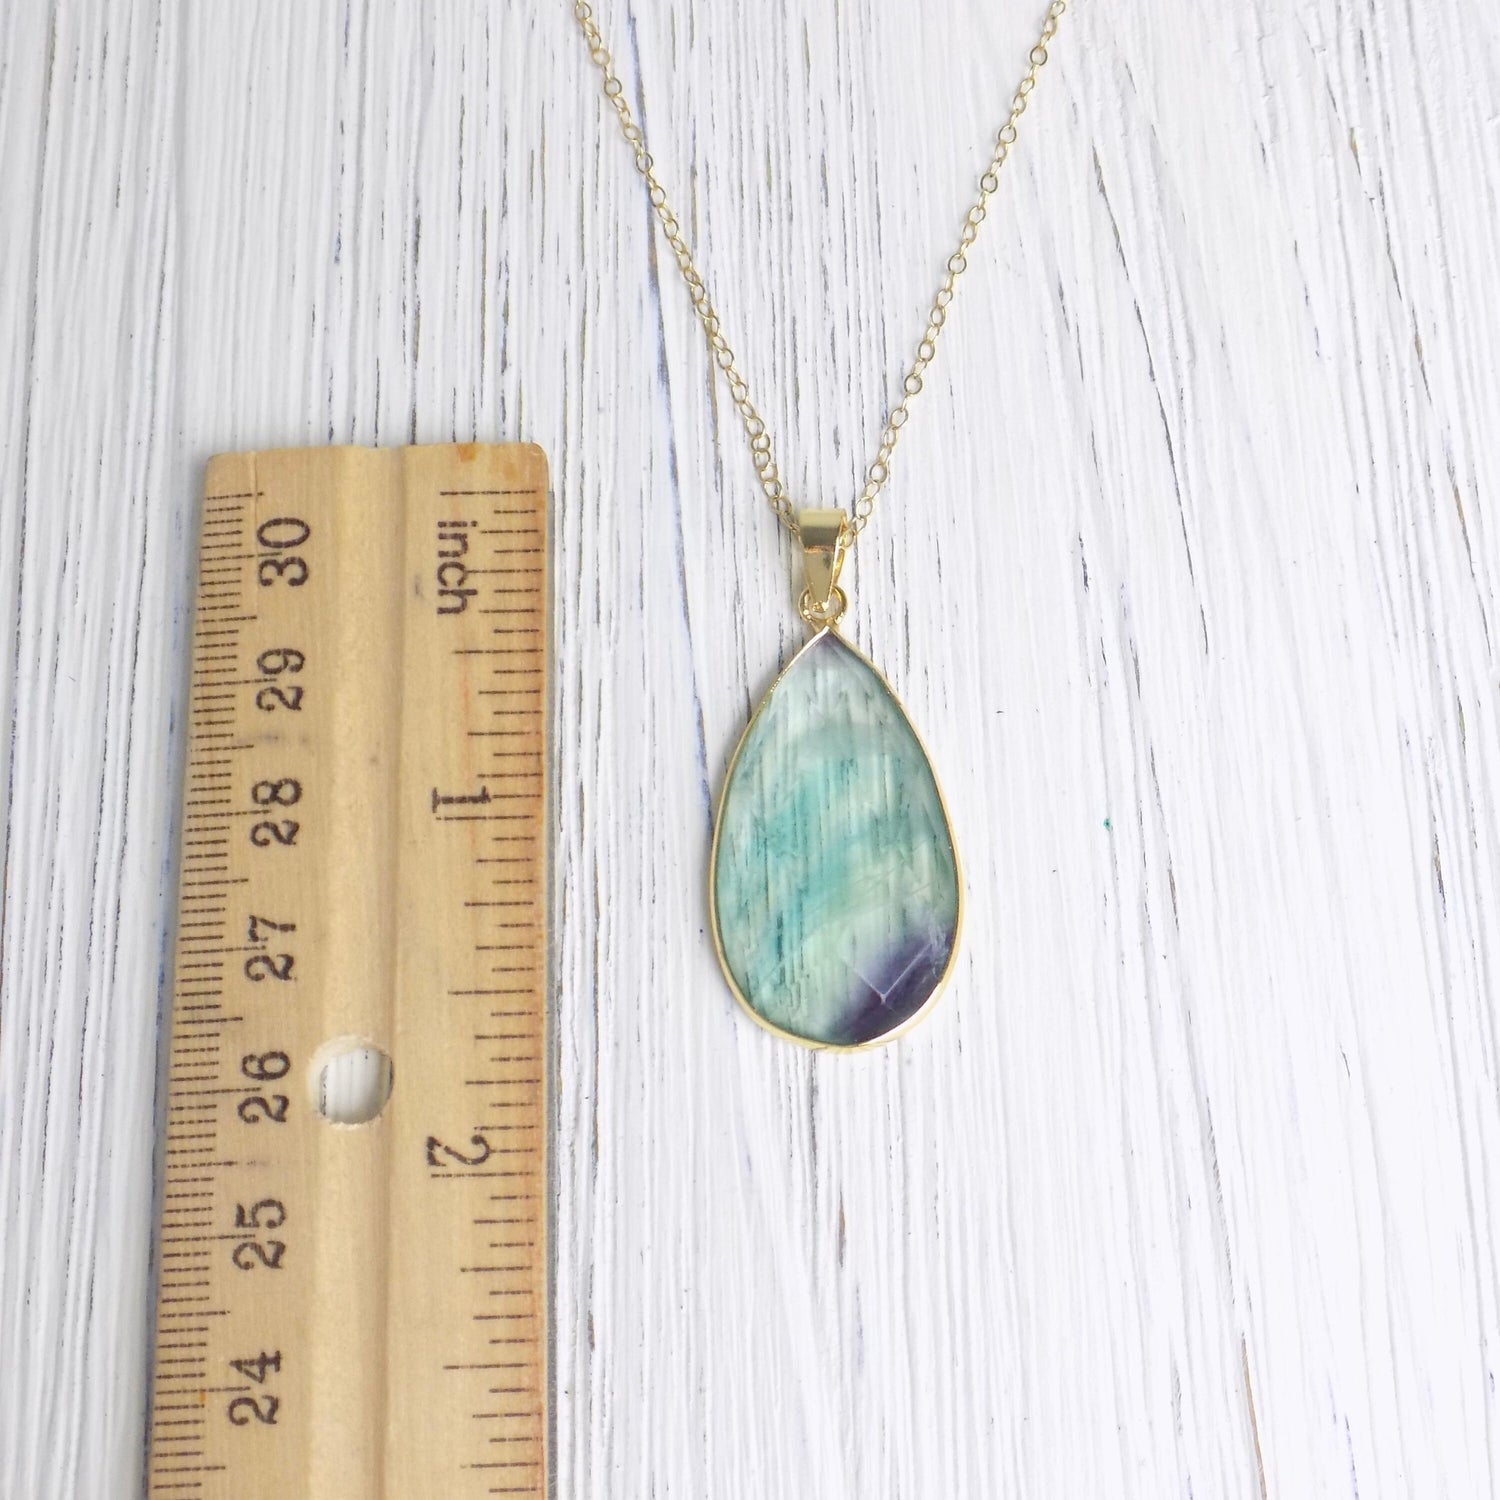 Fluorite Necklace, Boho Necklace, Purple Green Crystal Necklace, Chunky Gemstone Necklace, Gold Layering Necklace, Mom Gift, M6-165